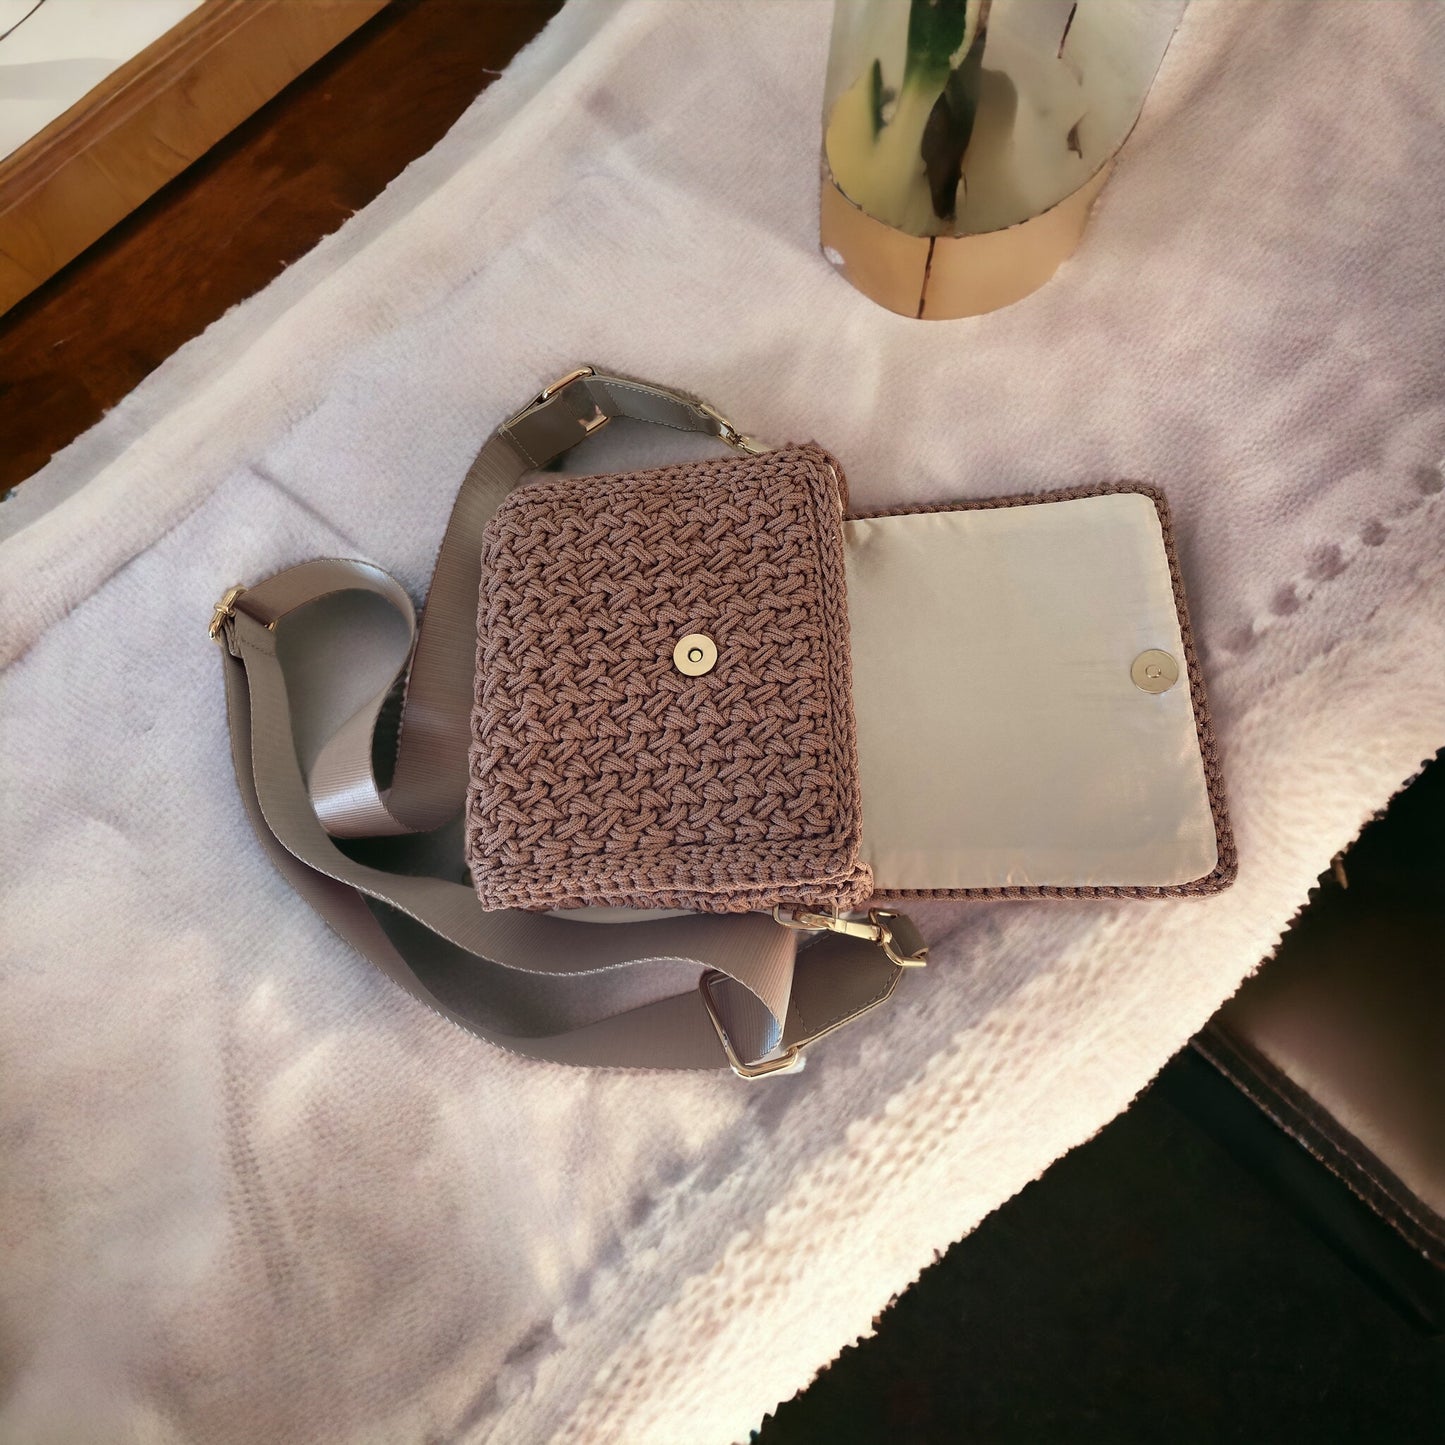 Chic mini crossbody features a relaxed fit and an adjustable long strap